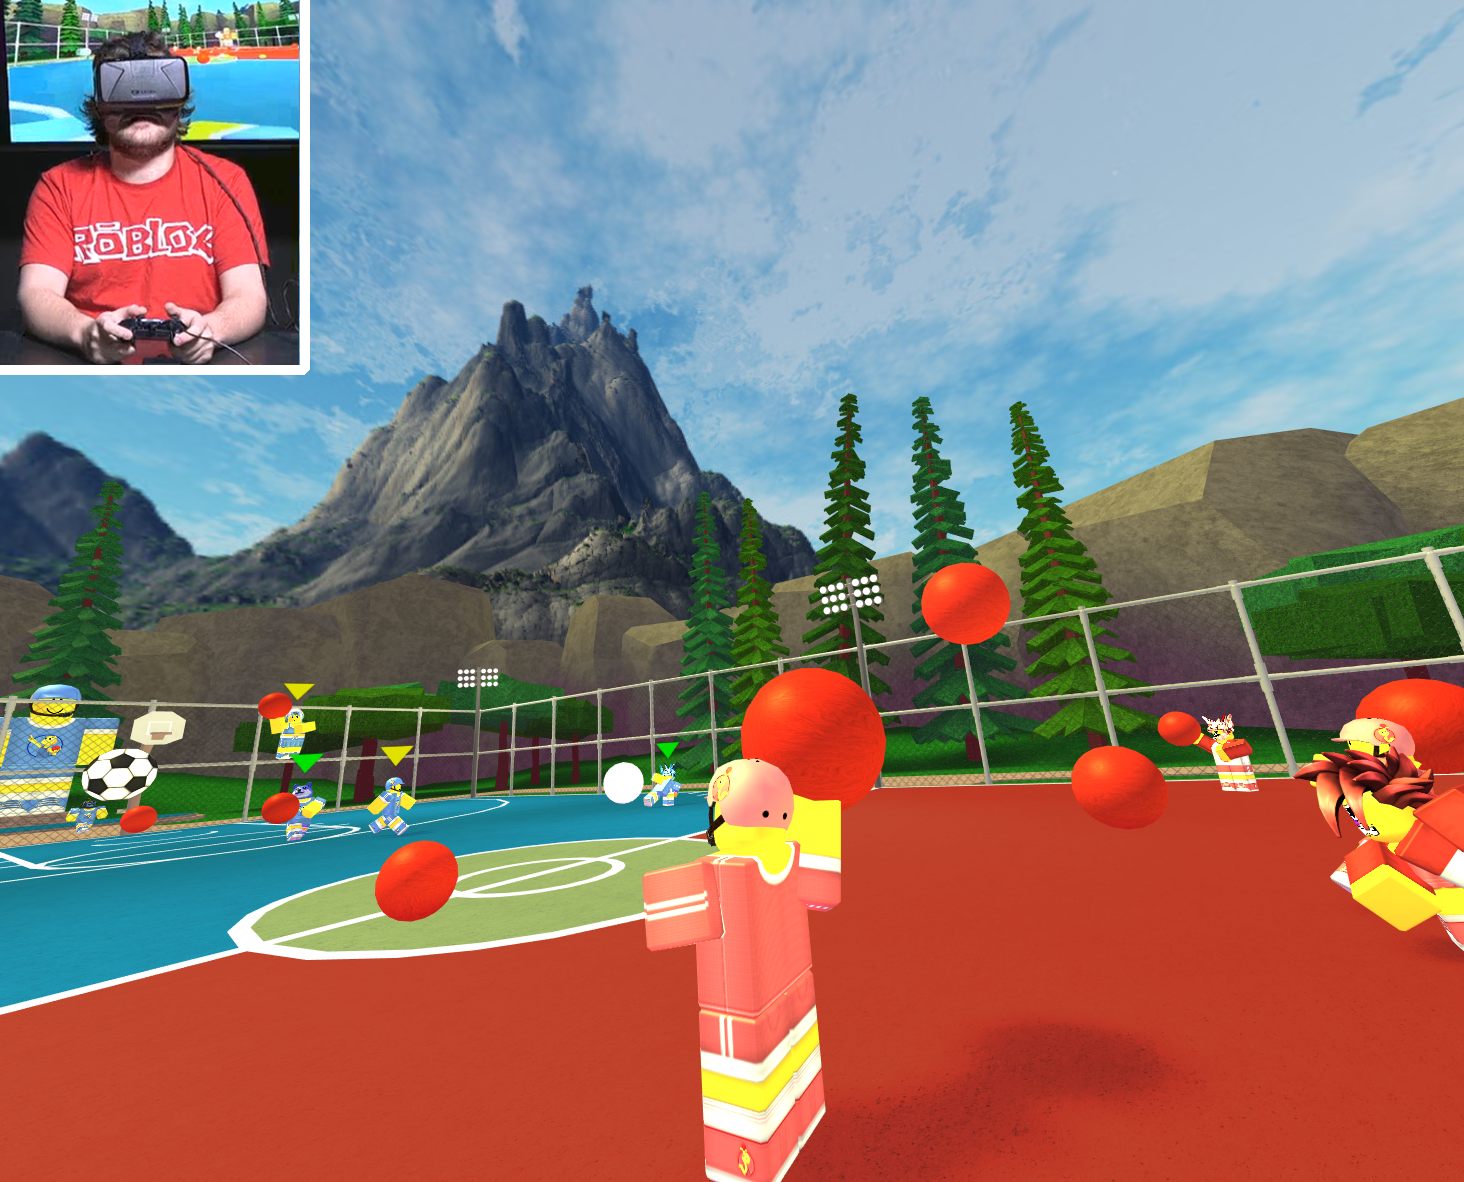 ROBLOX Officially Gets VR Support, Becomes the Largest Social VR Platform